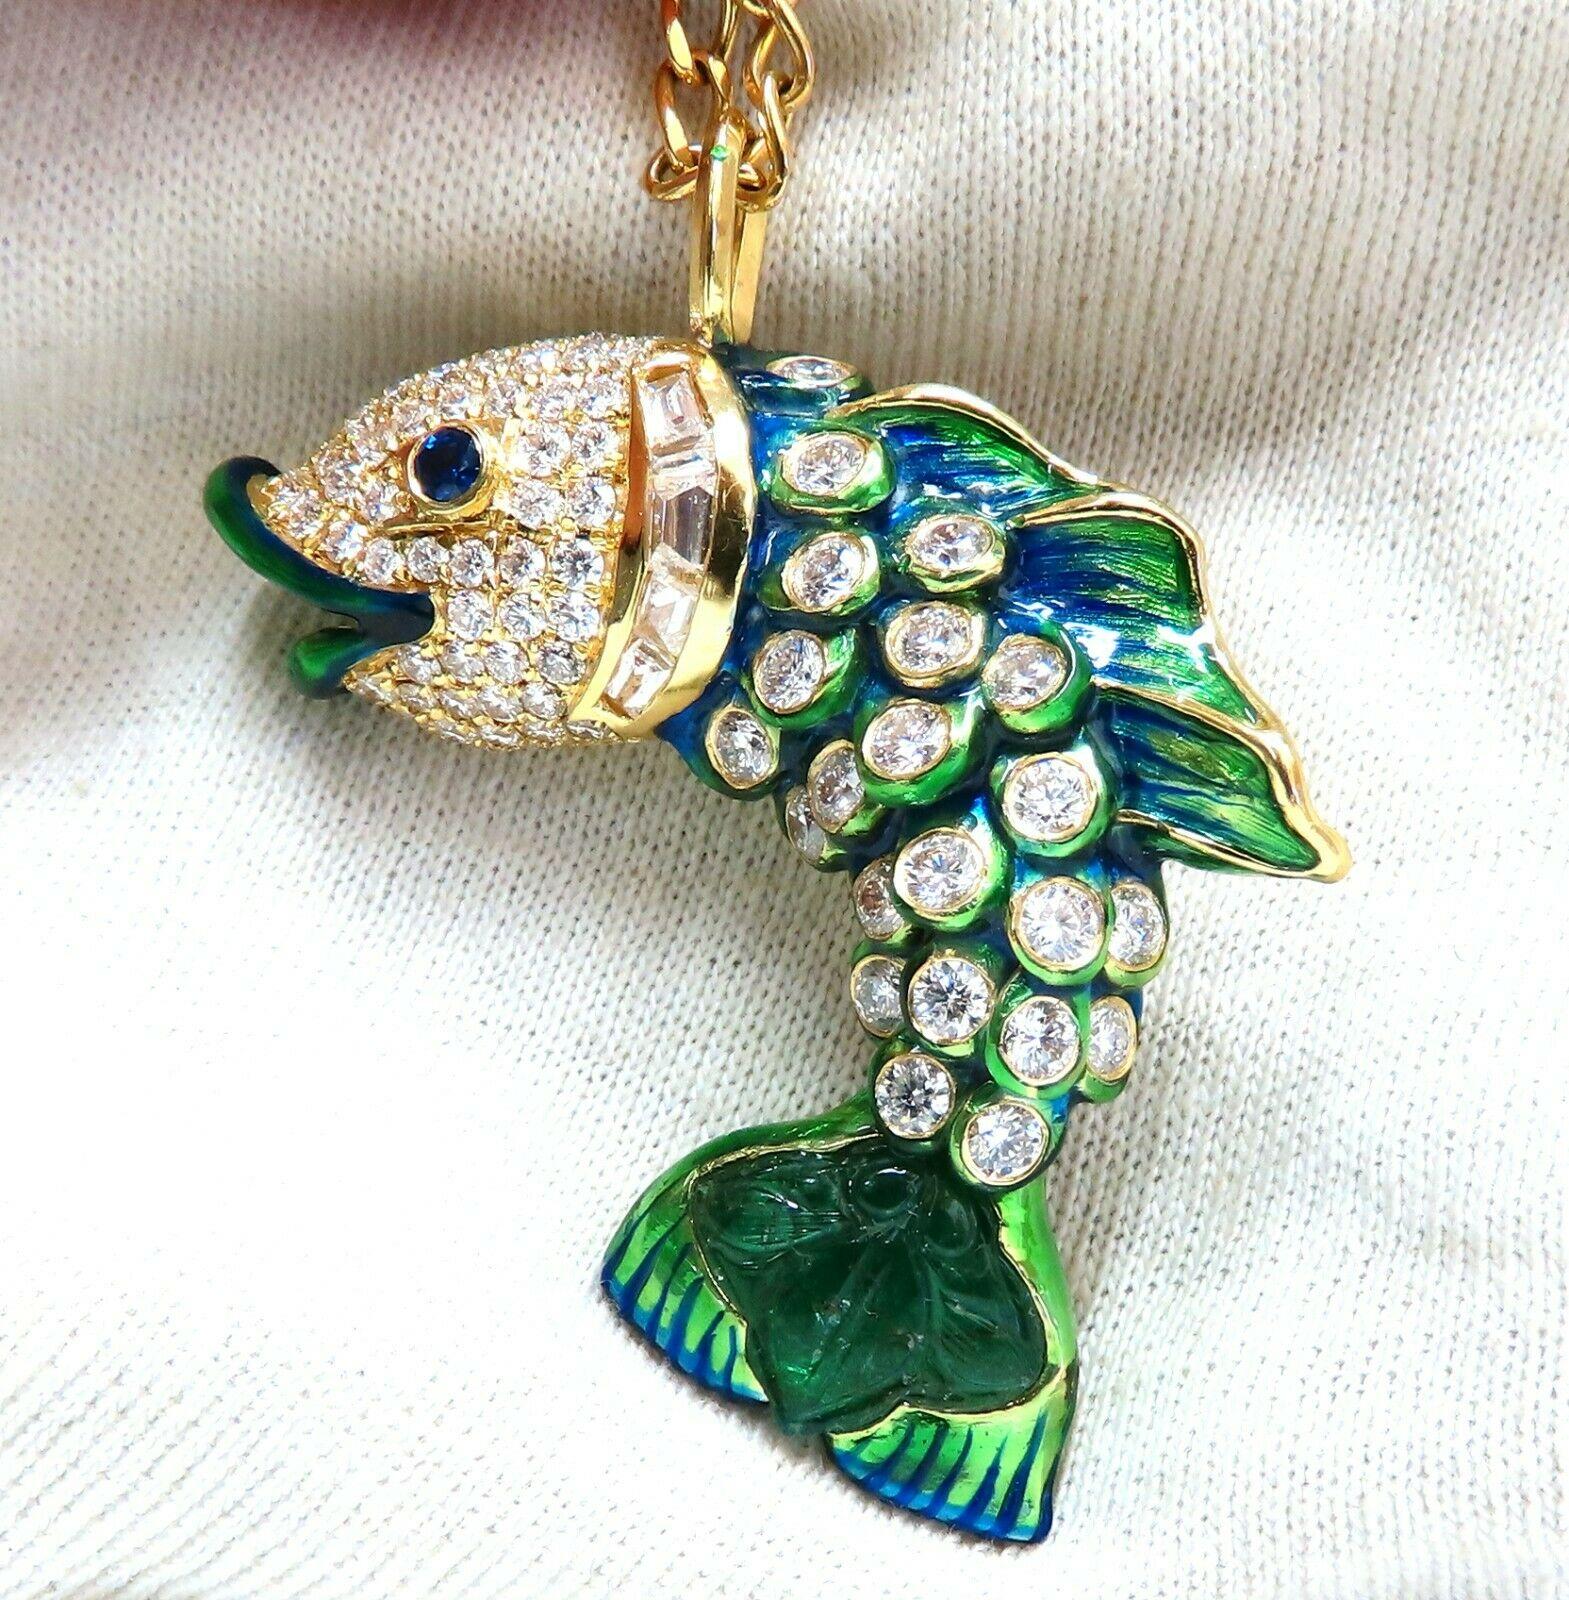 Lucky Catch.

5.36ct. Natural Diamonds fish pendant.
Custom Handmade made 
Rounds and Baguettes.
G-color, Vs-2 clarity

.26ct Natural Round Sapphire (Eye)
4.50ct Natural Carved Green Emerald (Tail)
3D domed effect
Excellent enamel